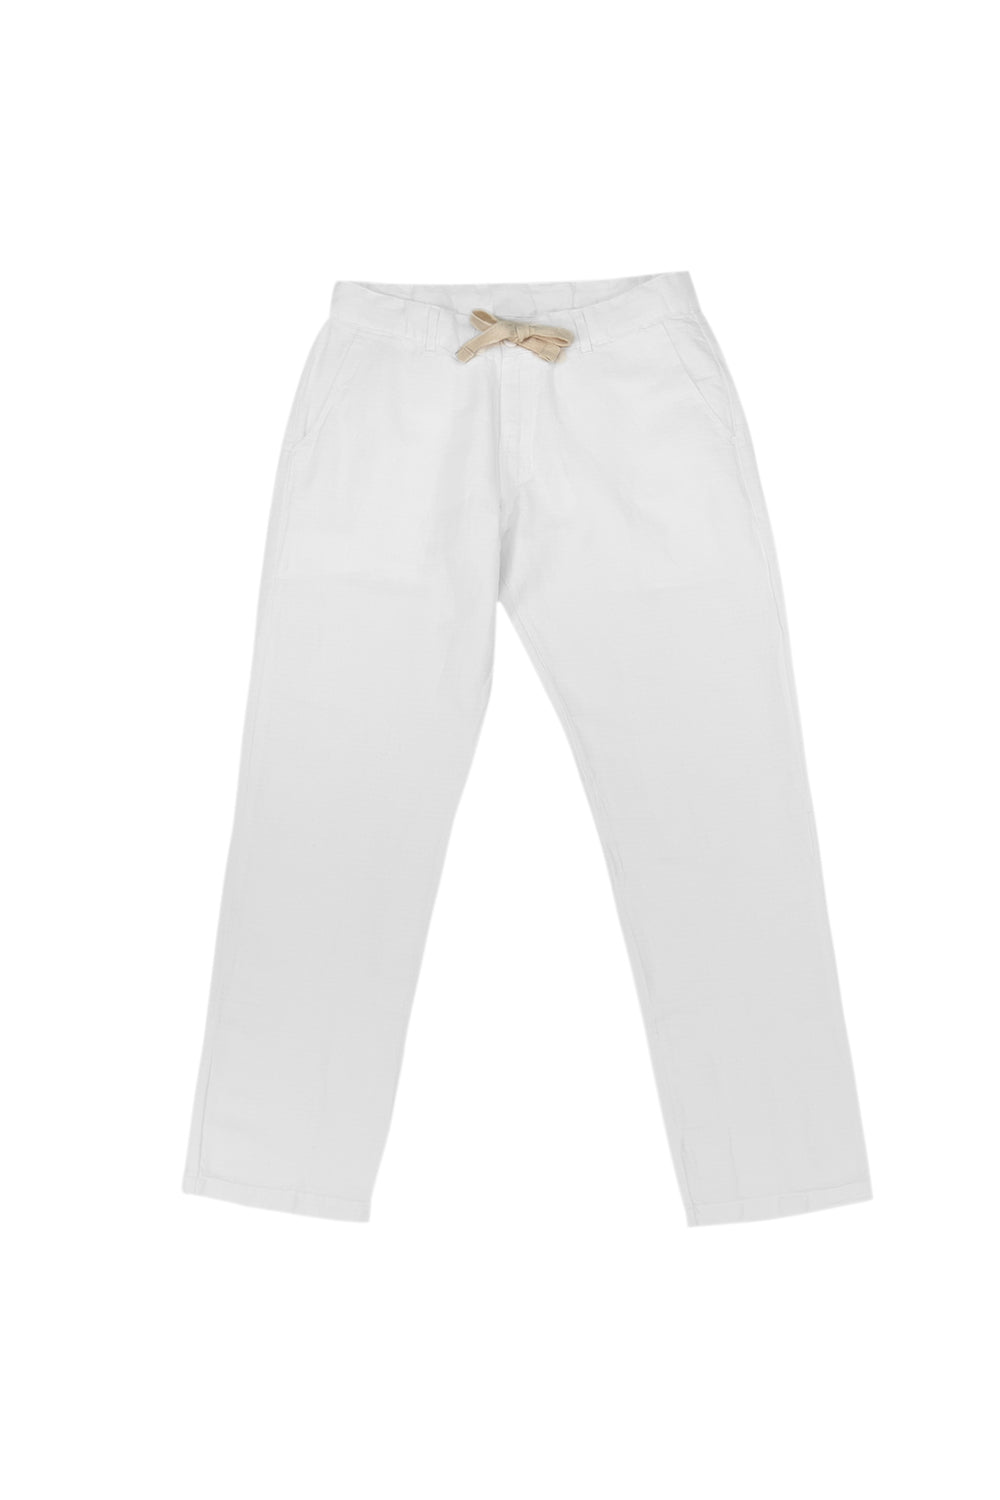 Traverse Pant | Jungmaven Hemp Clothing & Accessories / Color: Washed White